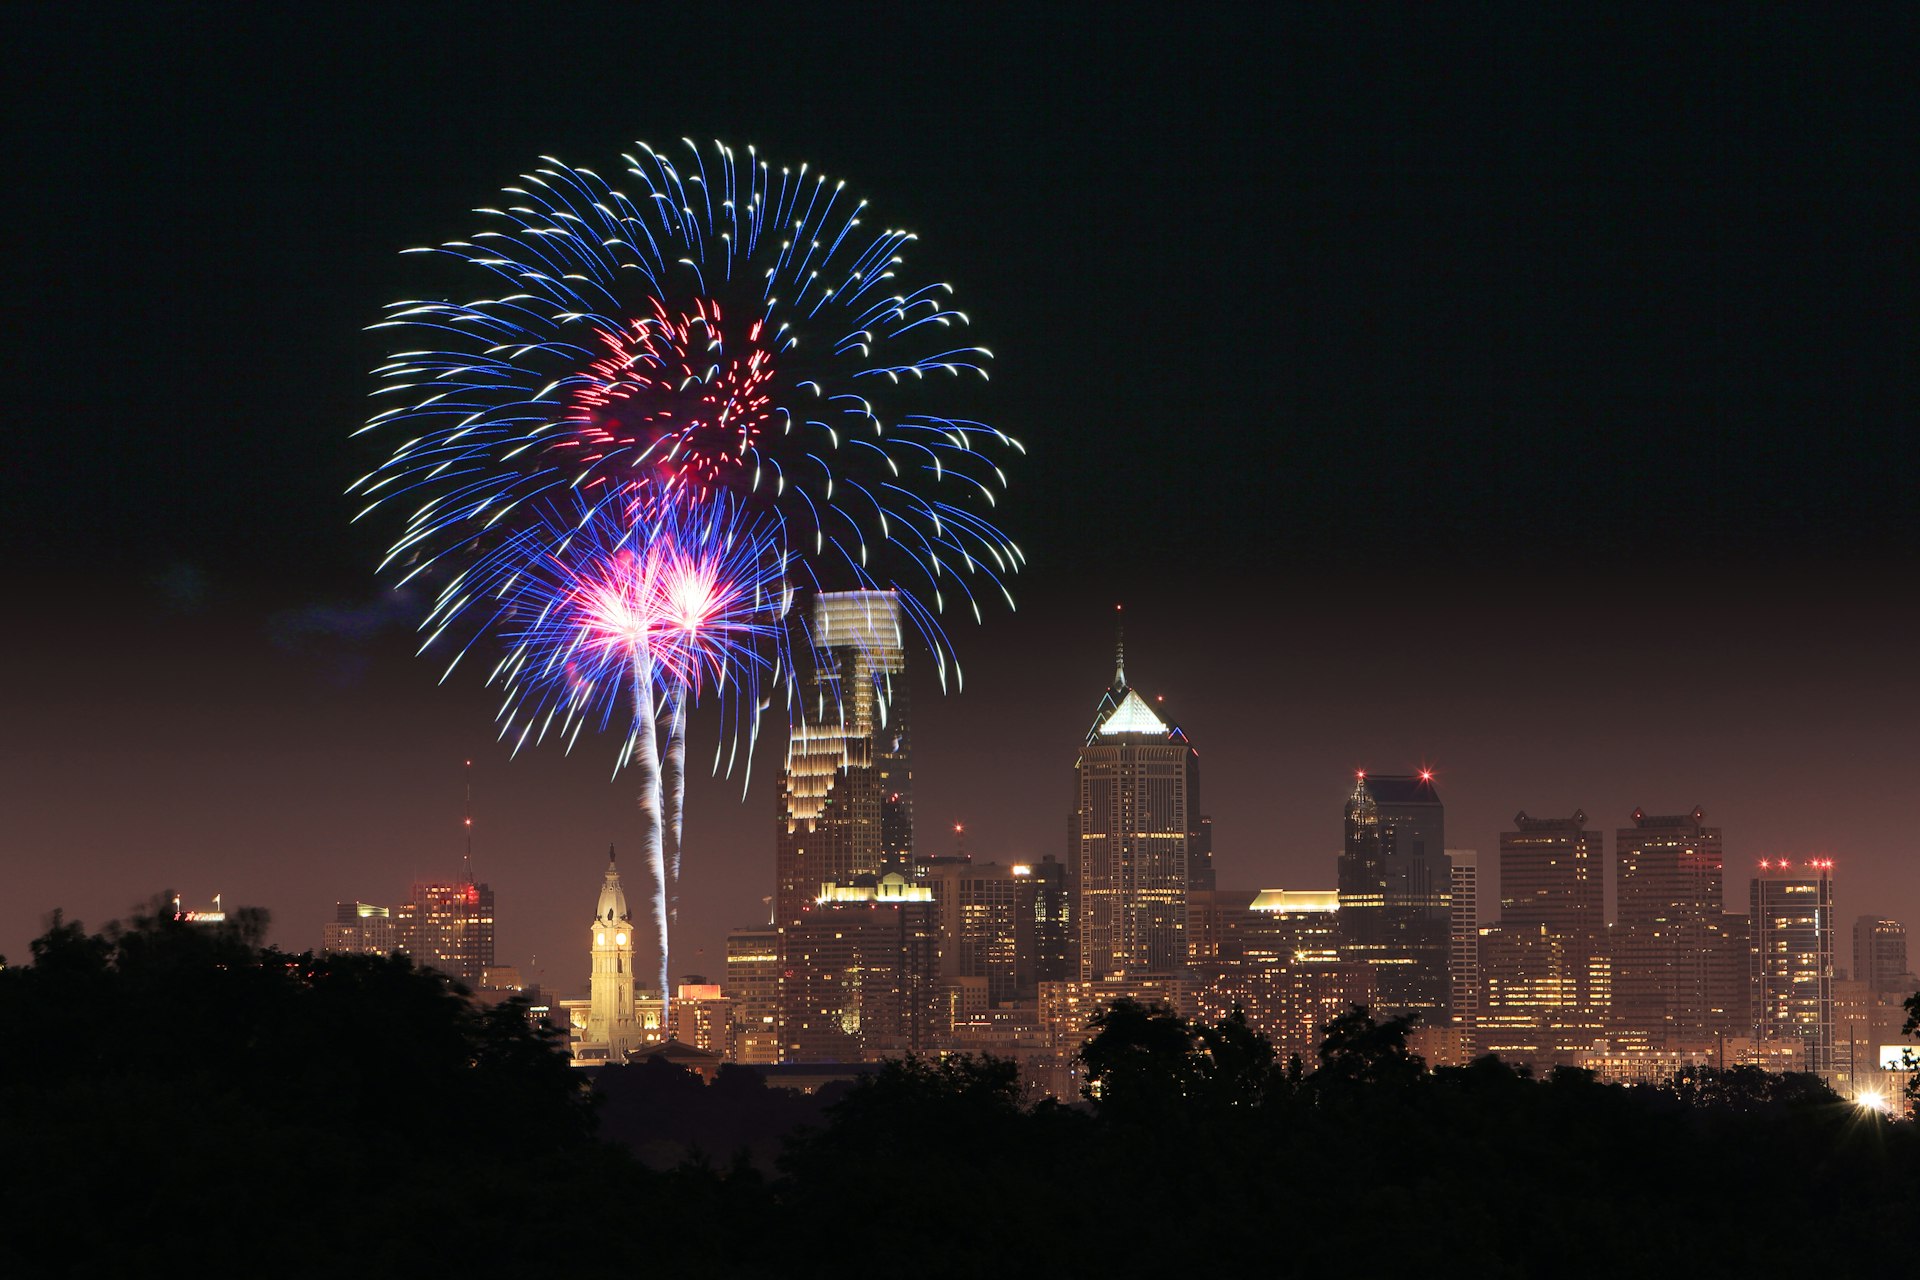 Fireworks exploded over a body of water with the Philadelphia skyline in the background. 